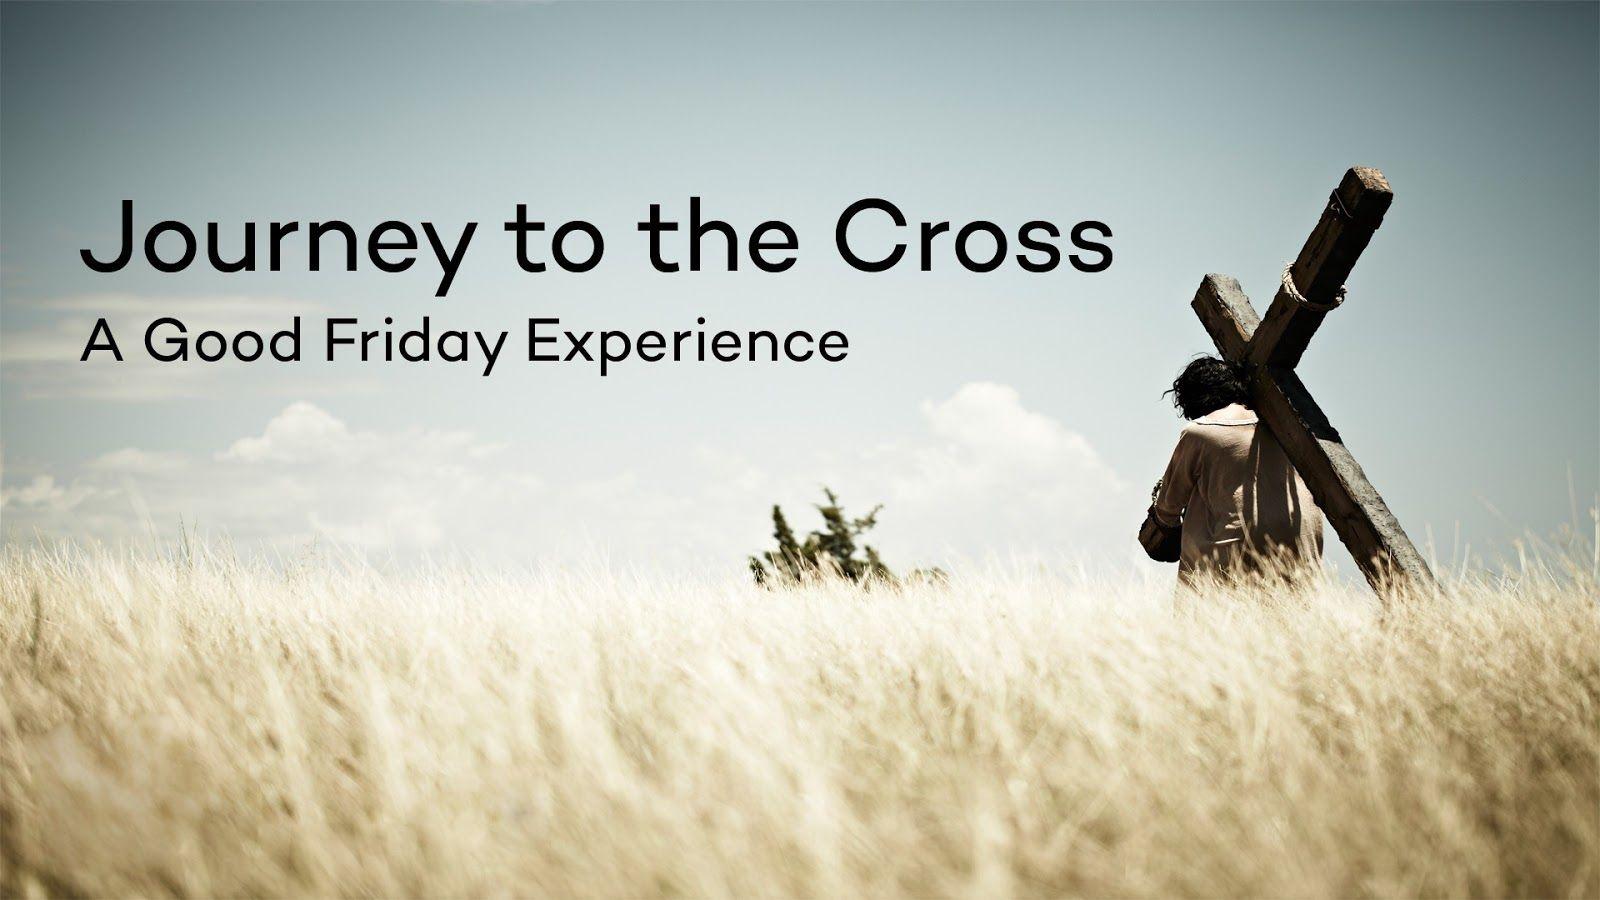 Good Friday 2018 Image, Wallpaper, Greetings, Cards, Picture